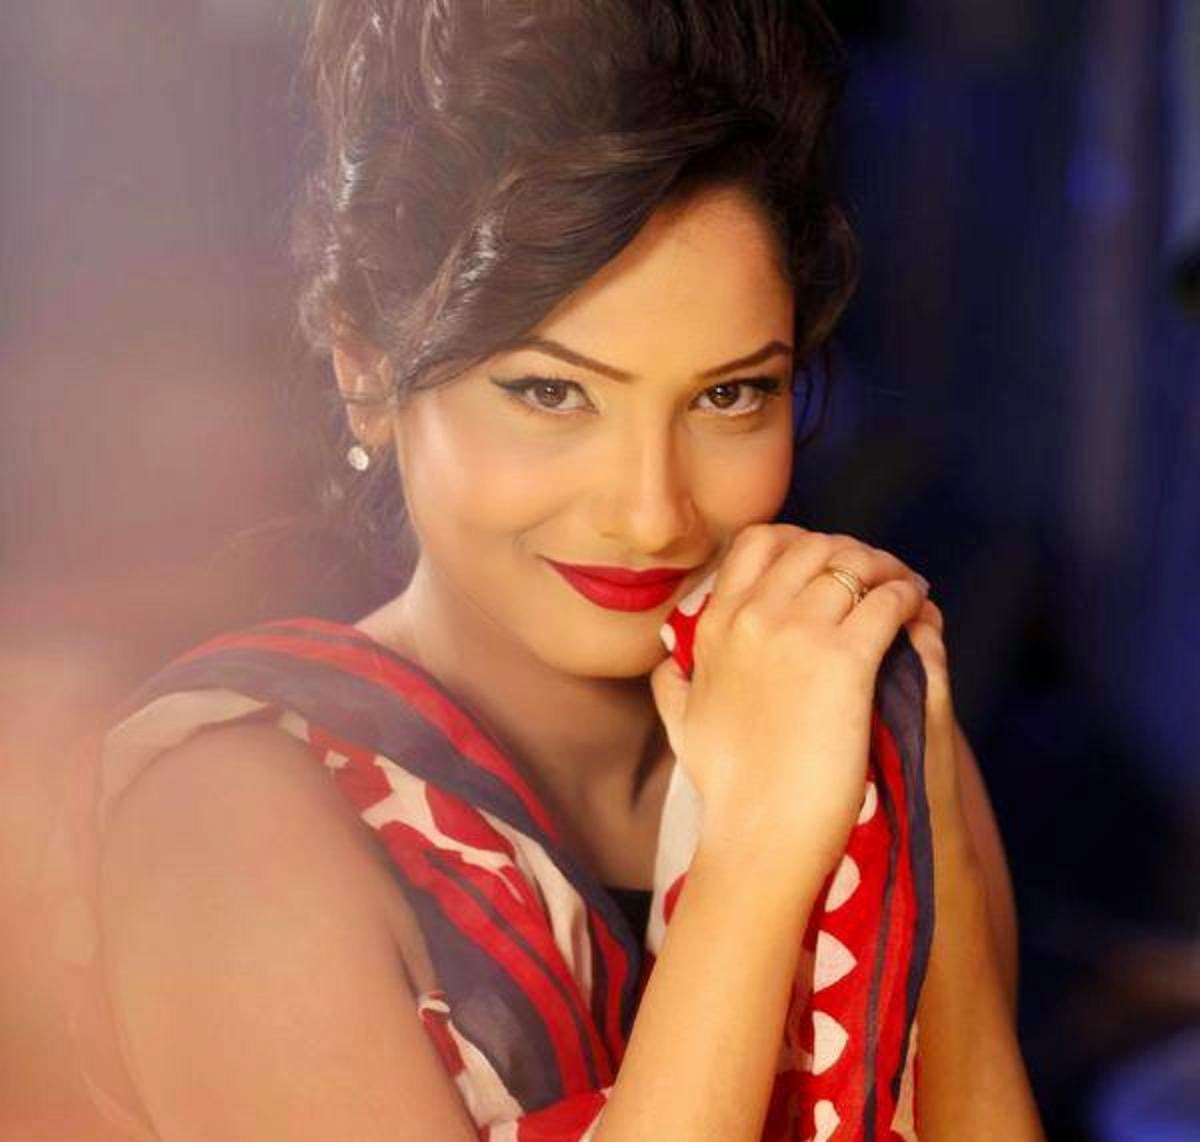 Ankita Lokhande to make her debut in Bollywood with Sanjay Dutt’s next film?